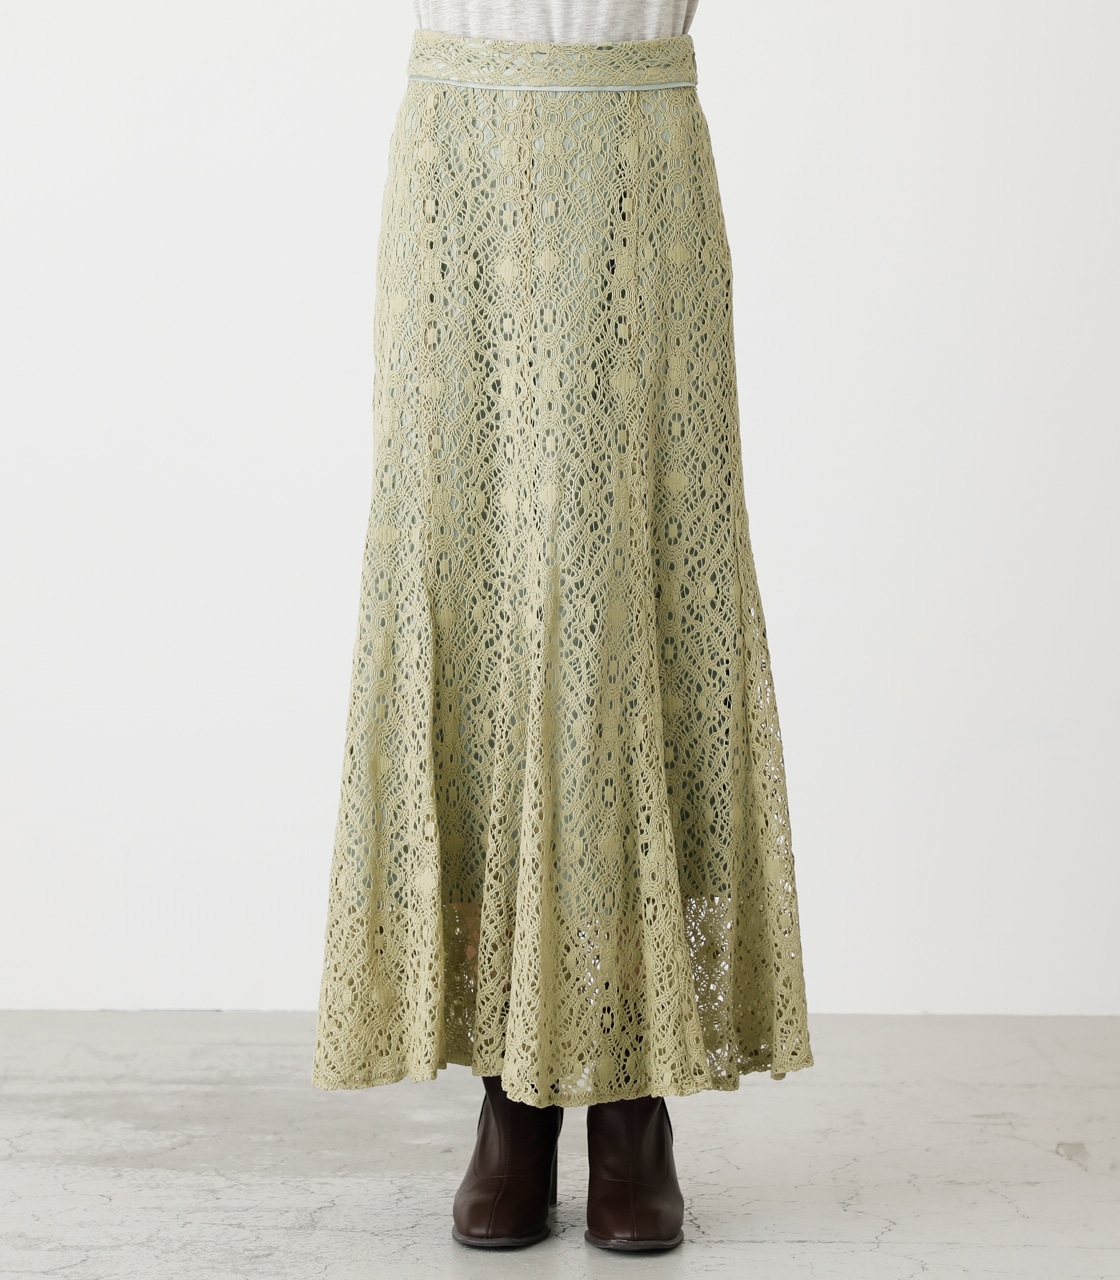 LACE NARROW SKIRT/レースナロースカート 詳細画像 LIME 5